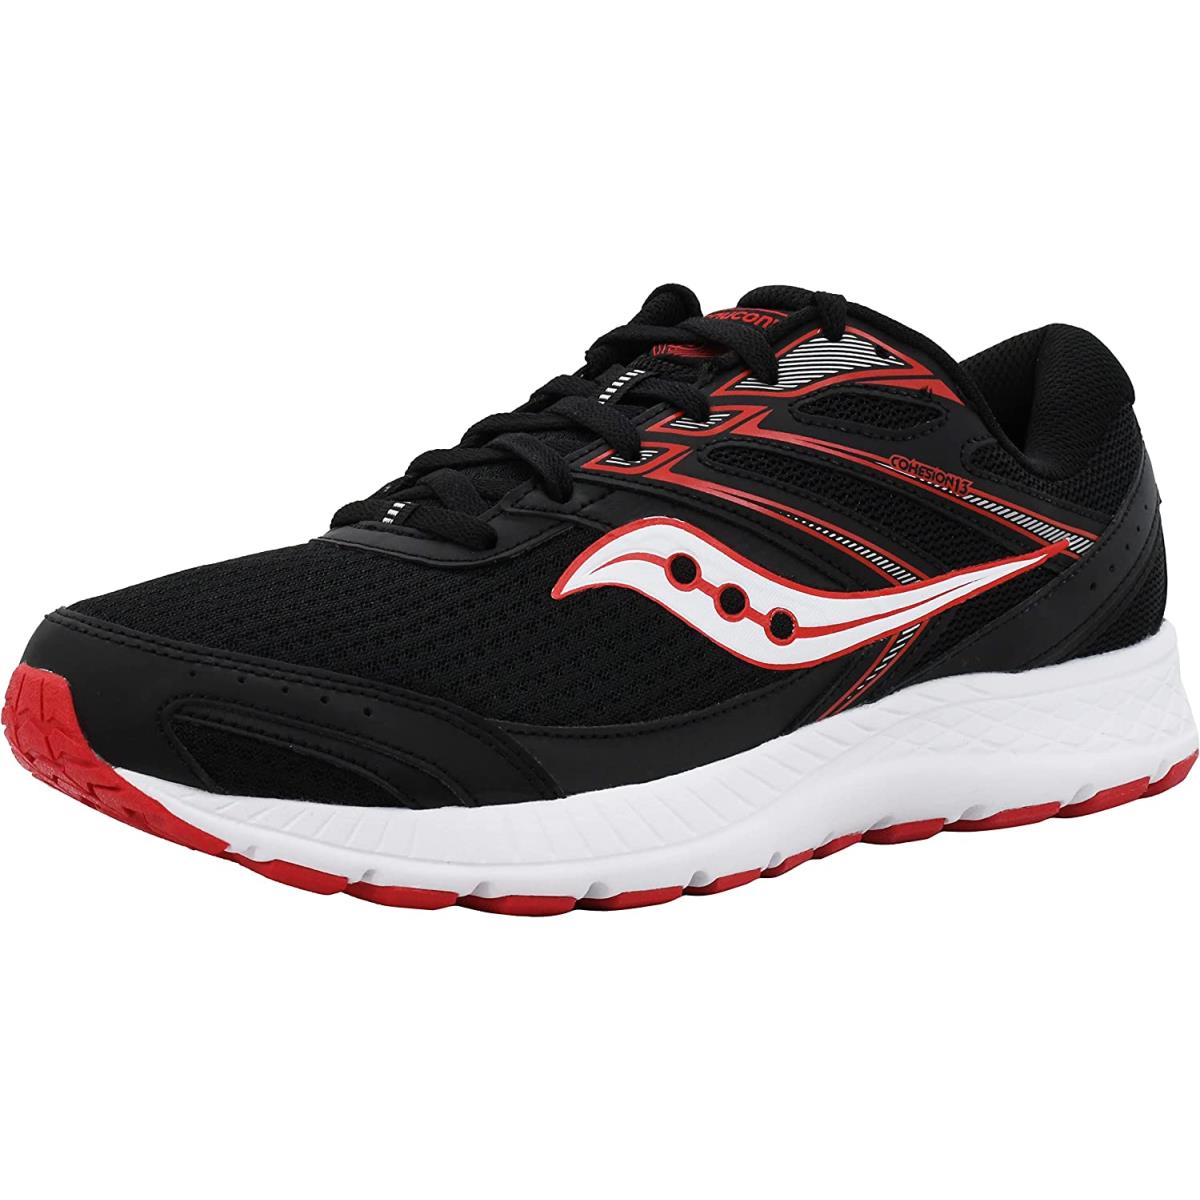 Saucony Men`s Cohesion 13 Running Shoe Black/Red